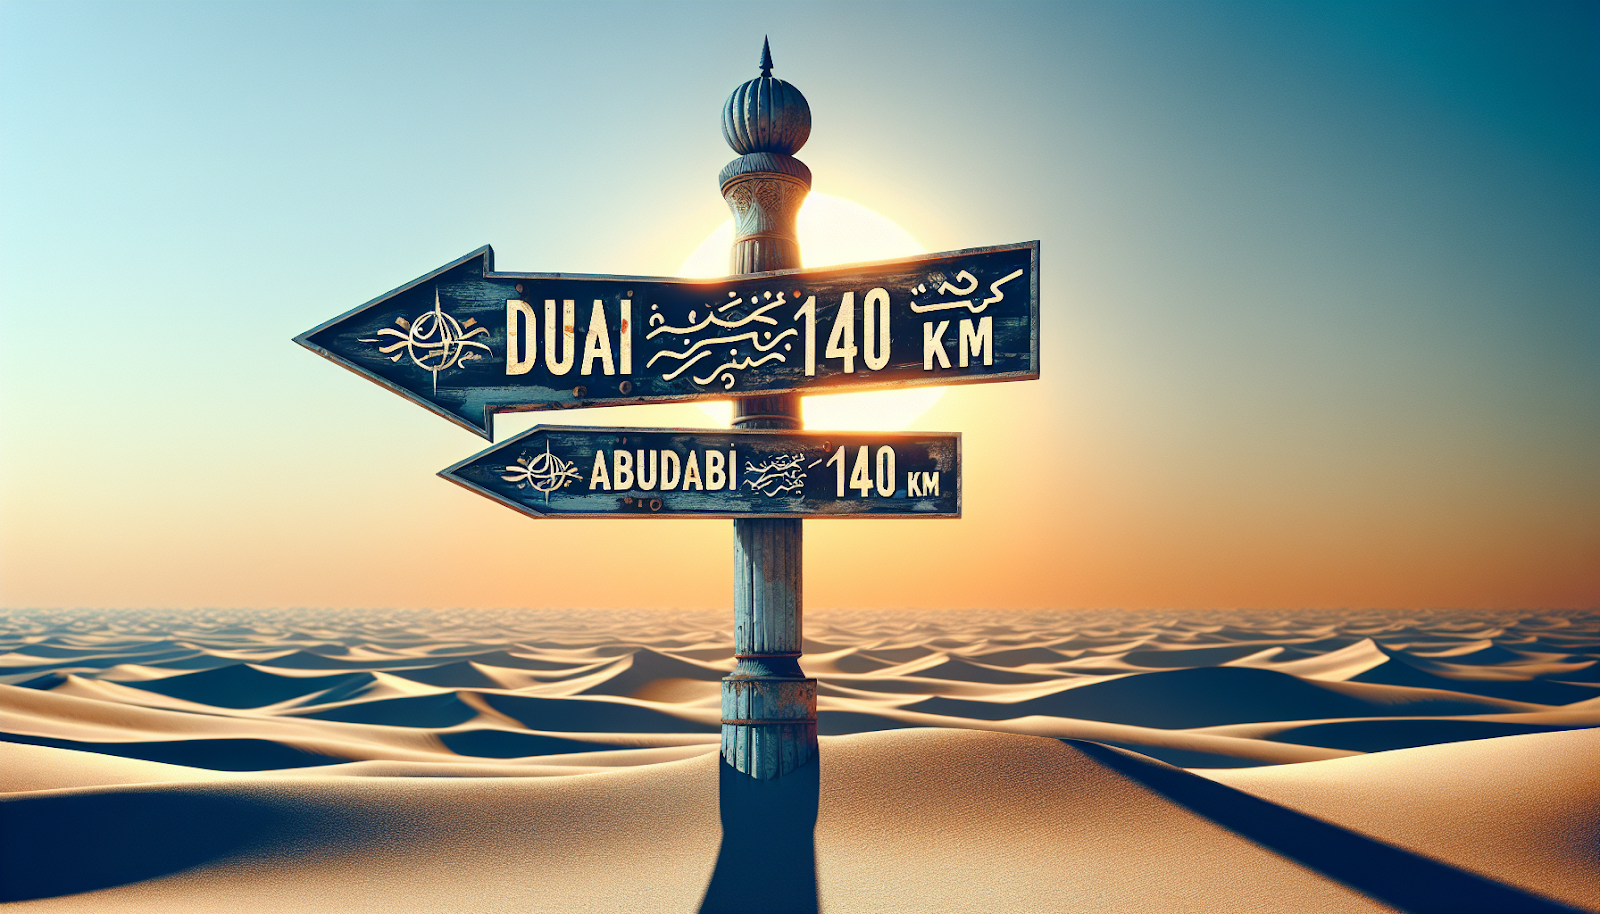 Illustration of the distance signboard from Dubai to Abu Dhabi